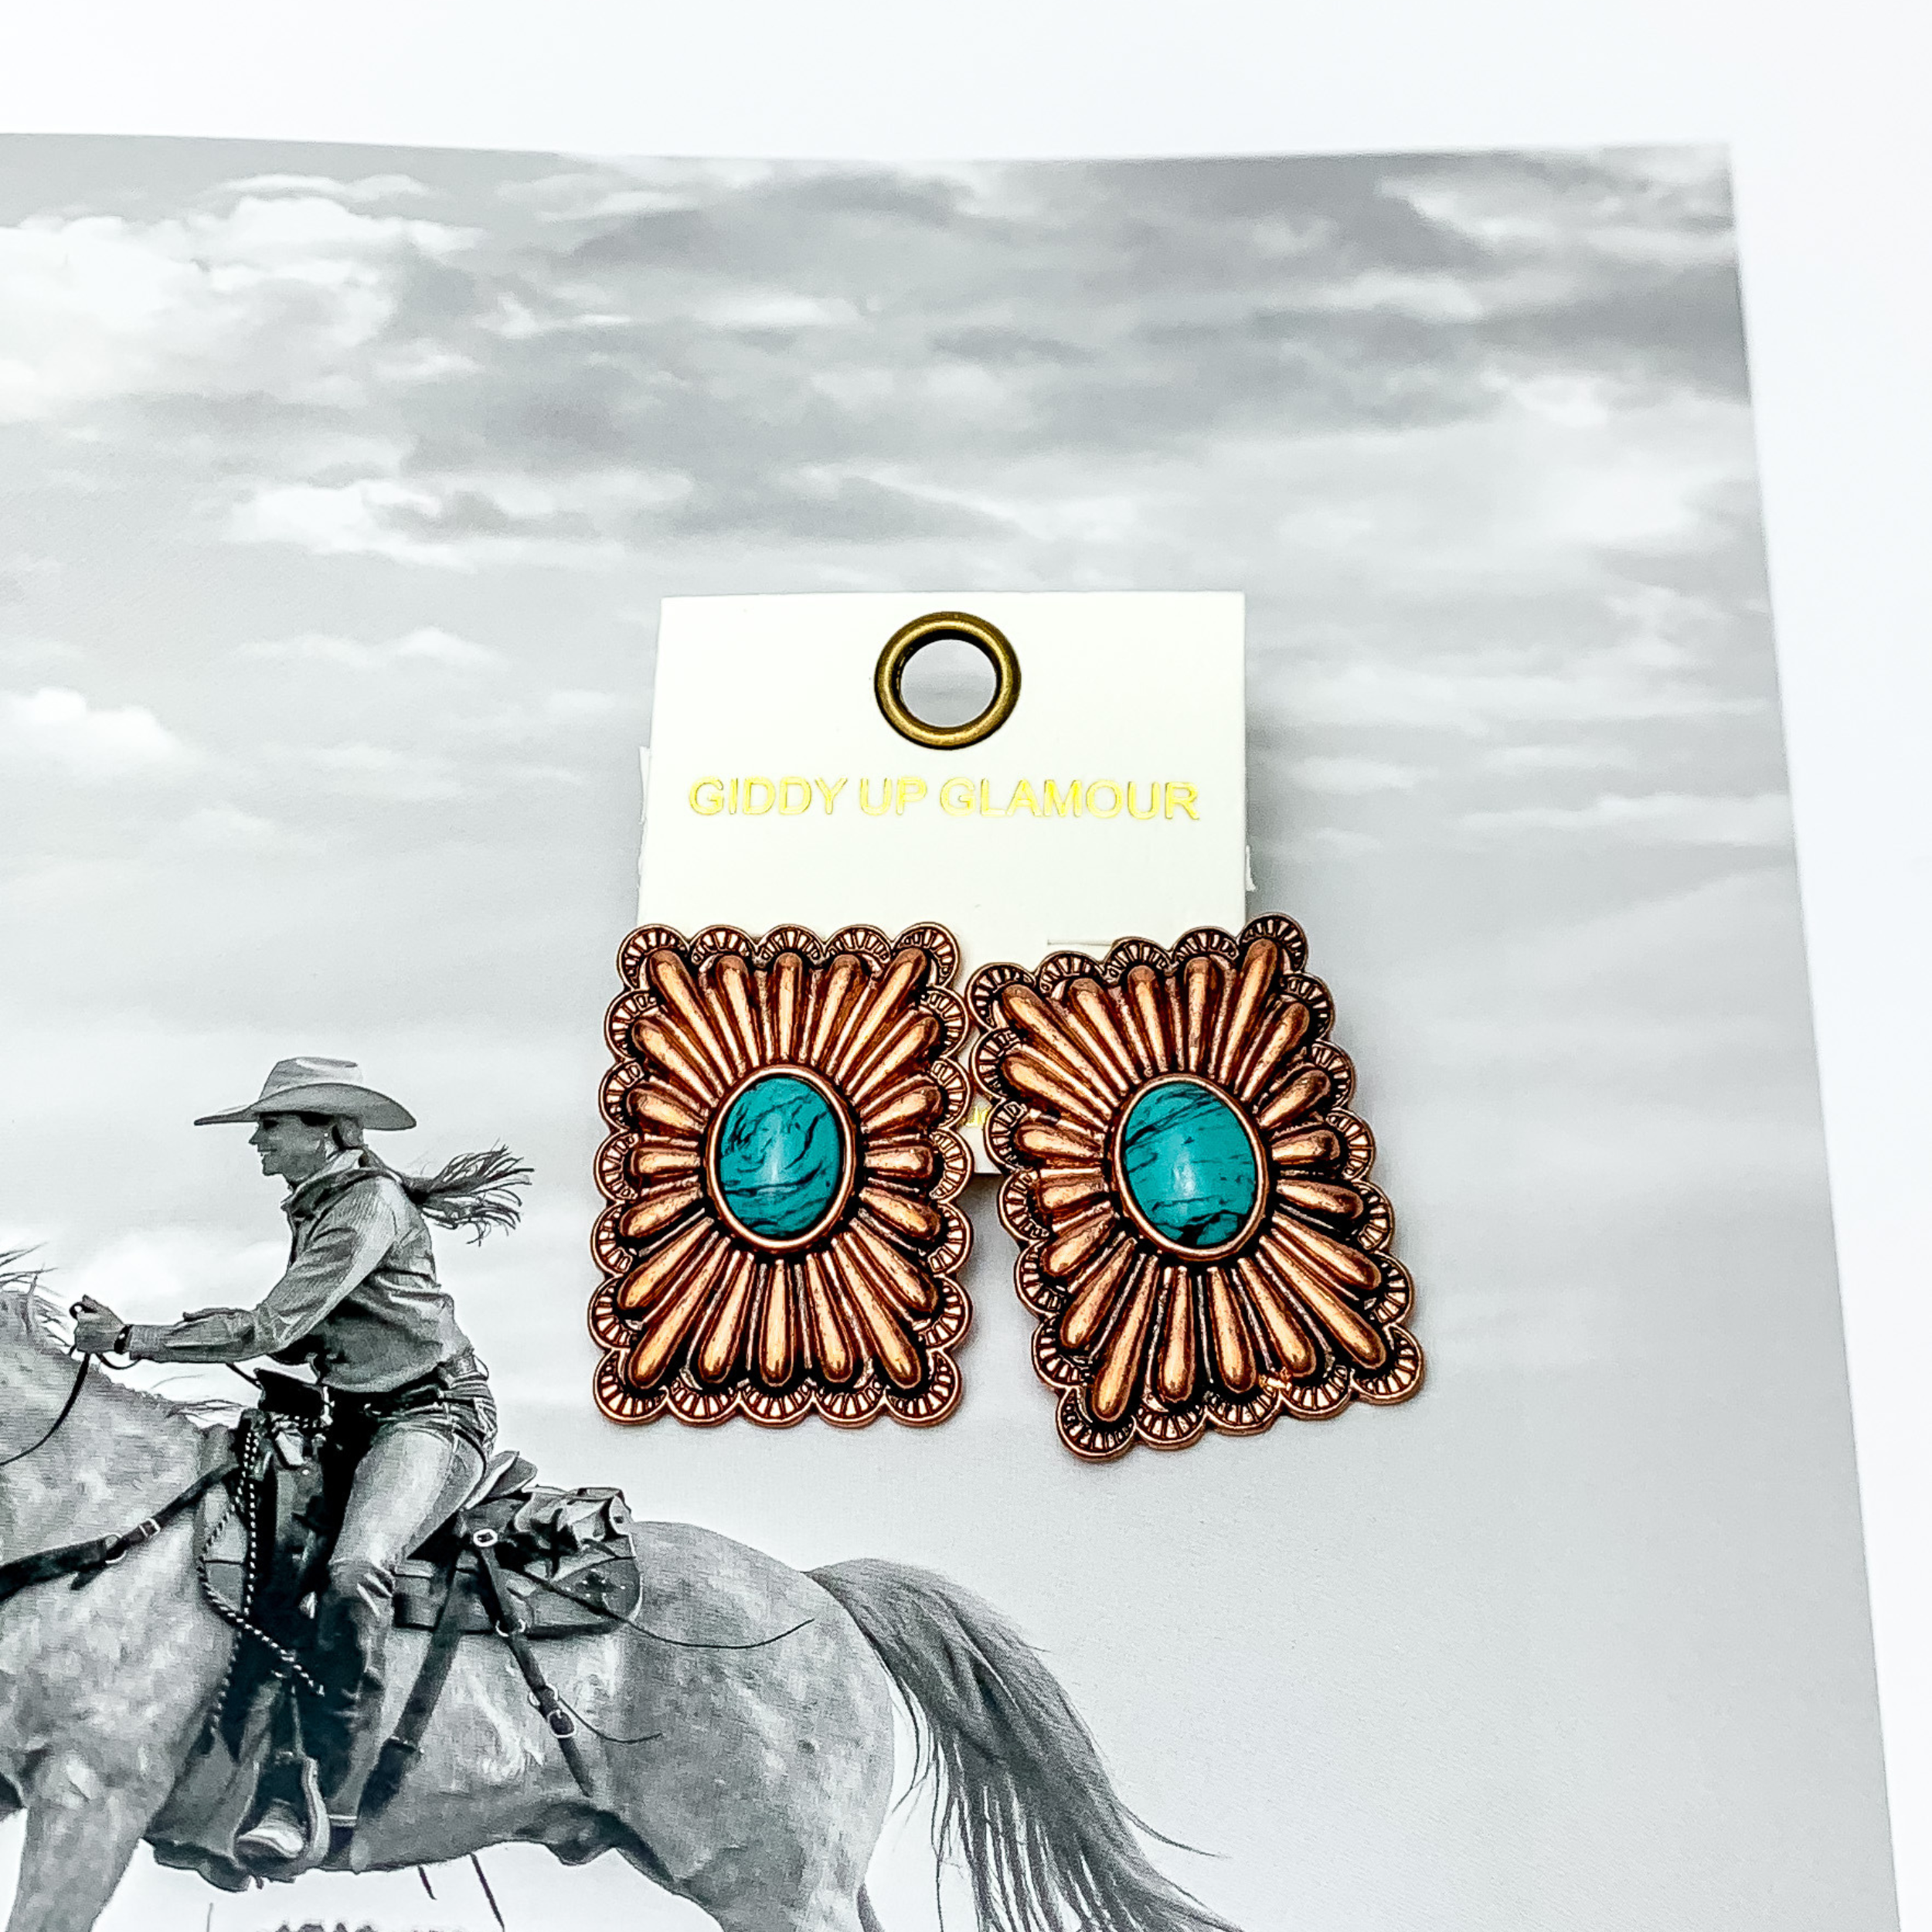 Western Flare copper Tone Rectangle Earrings With Stone in Turquoise. Pictured on a western scene background.